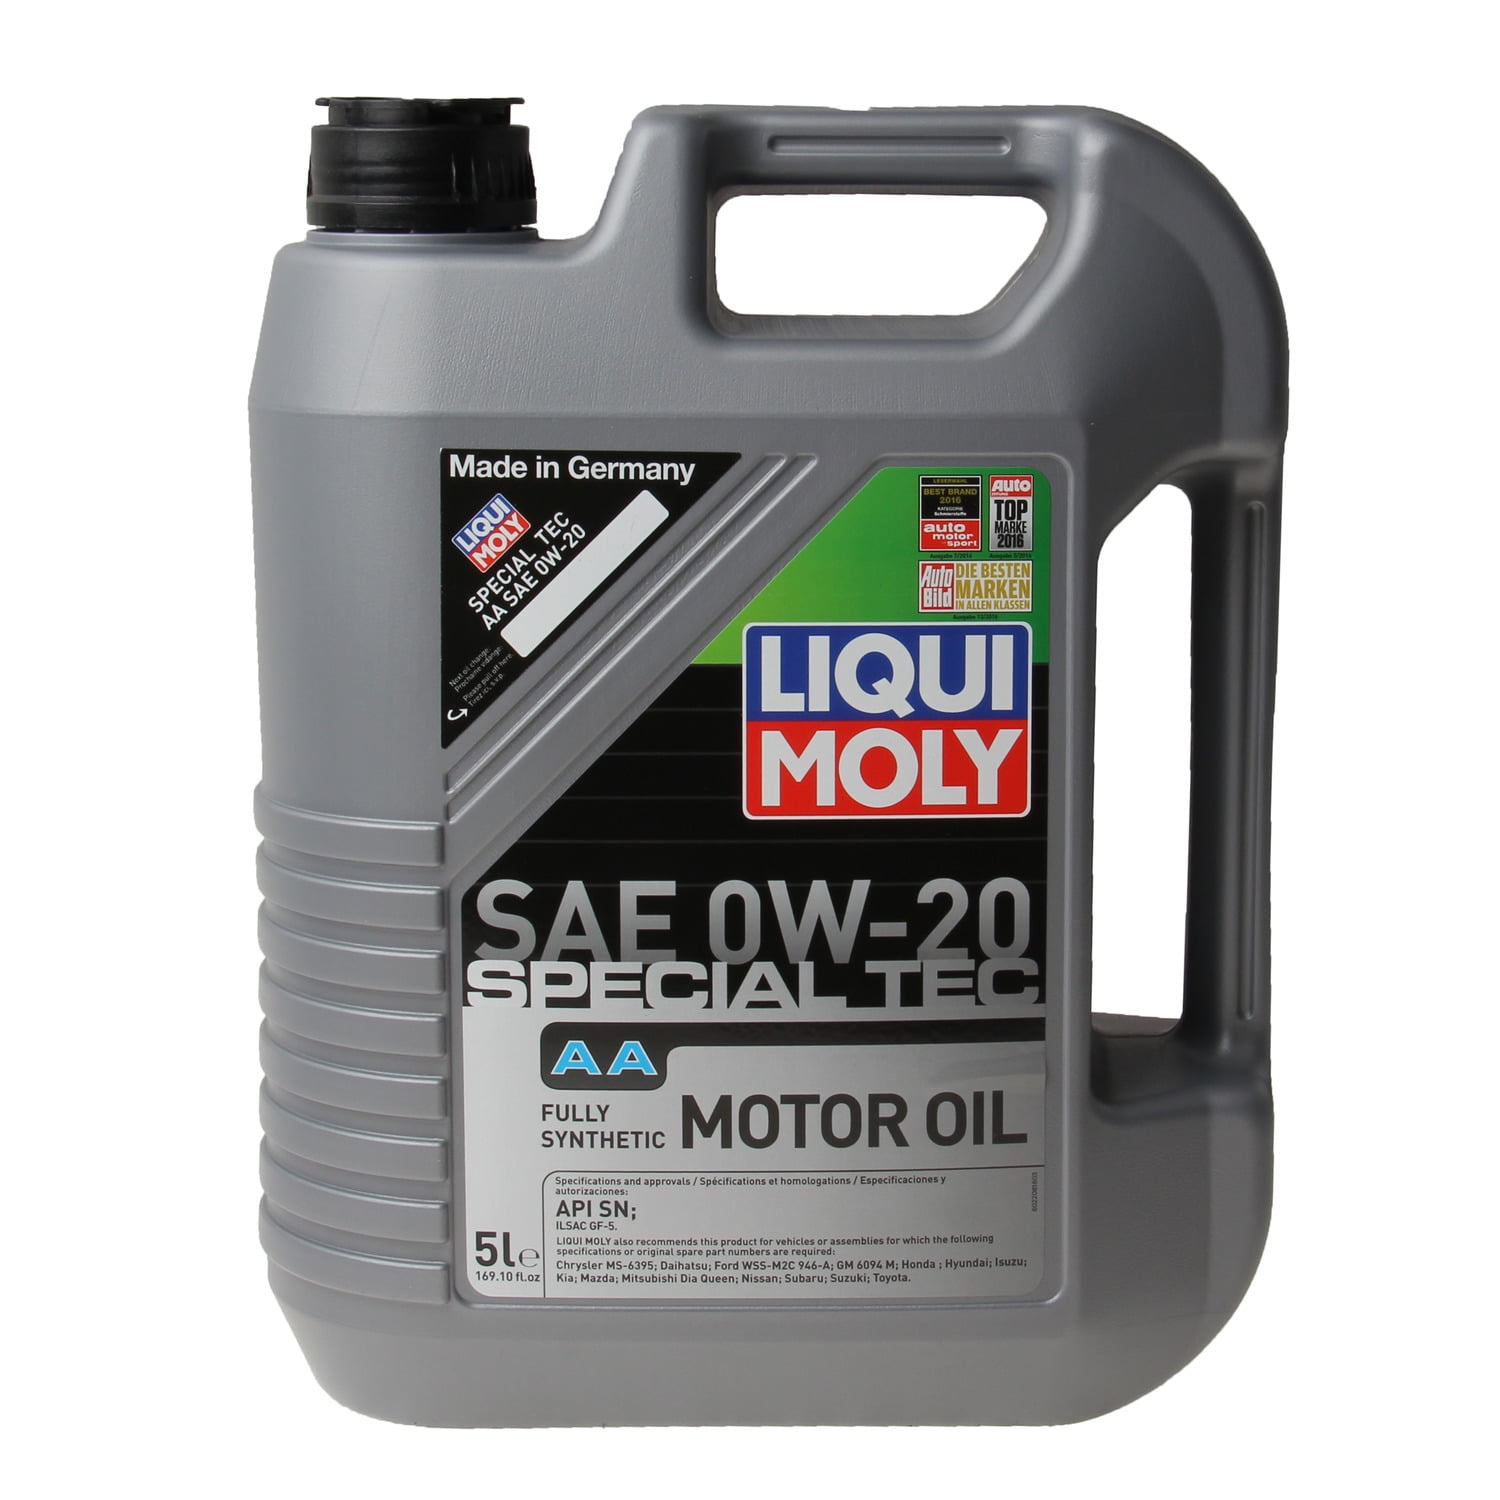 LIQUI MOLY Special Tec AA SAE 0W-20 | 5 L | Synthesis technology motor oil  | SKU: 2208